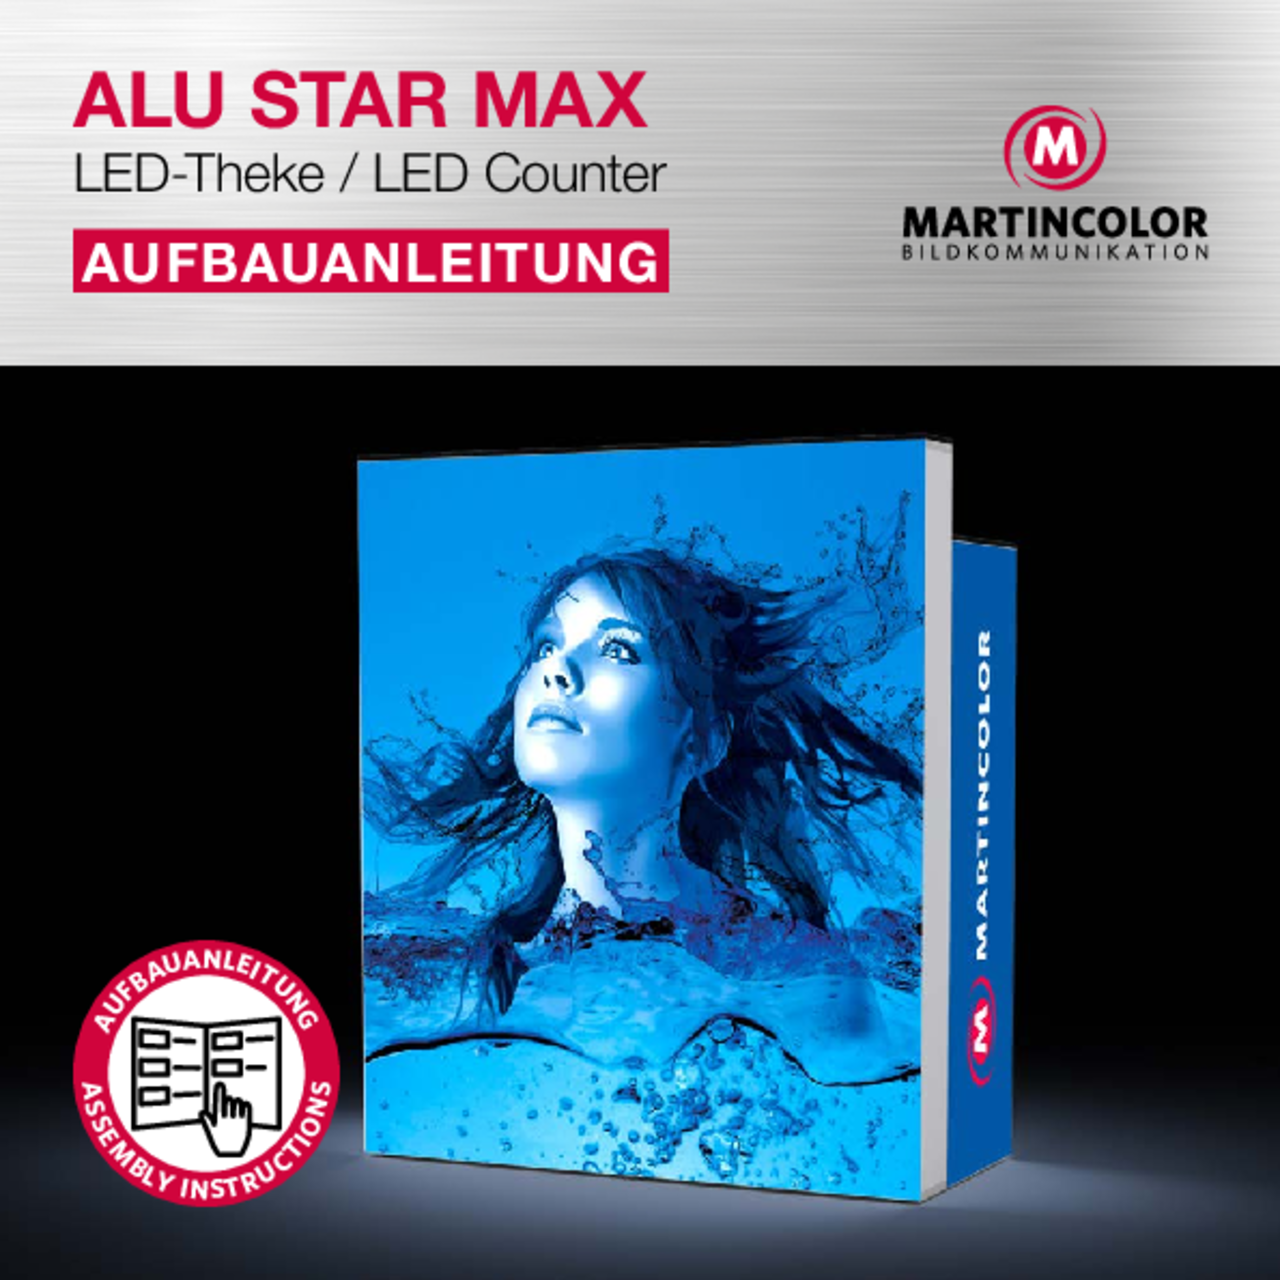 ALU STAR MAX Counter assembly instructions PDF